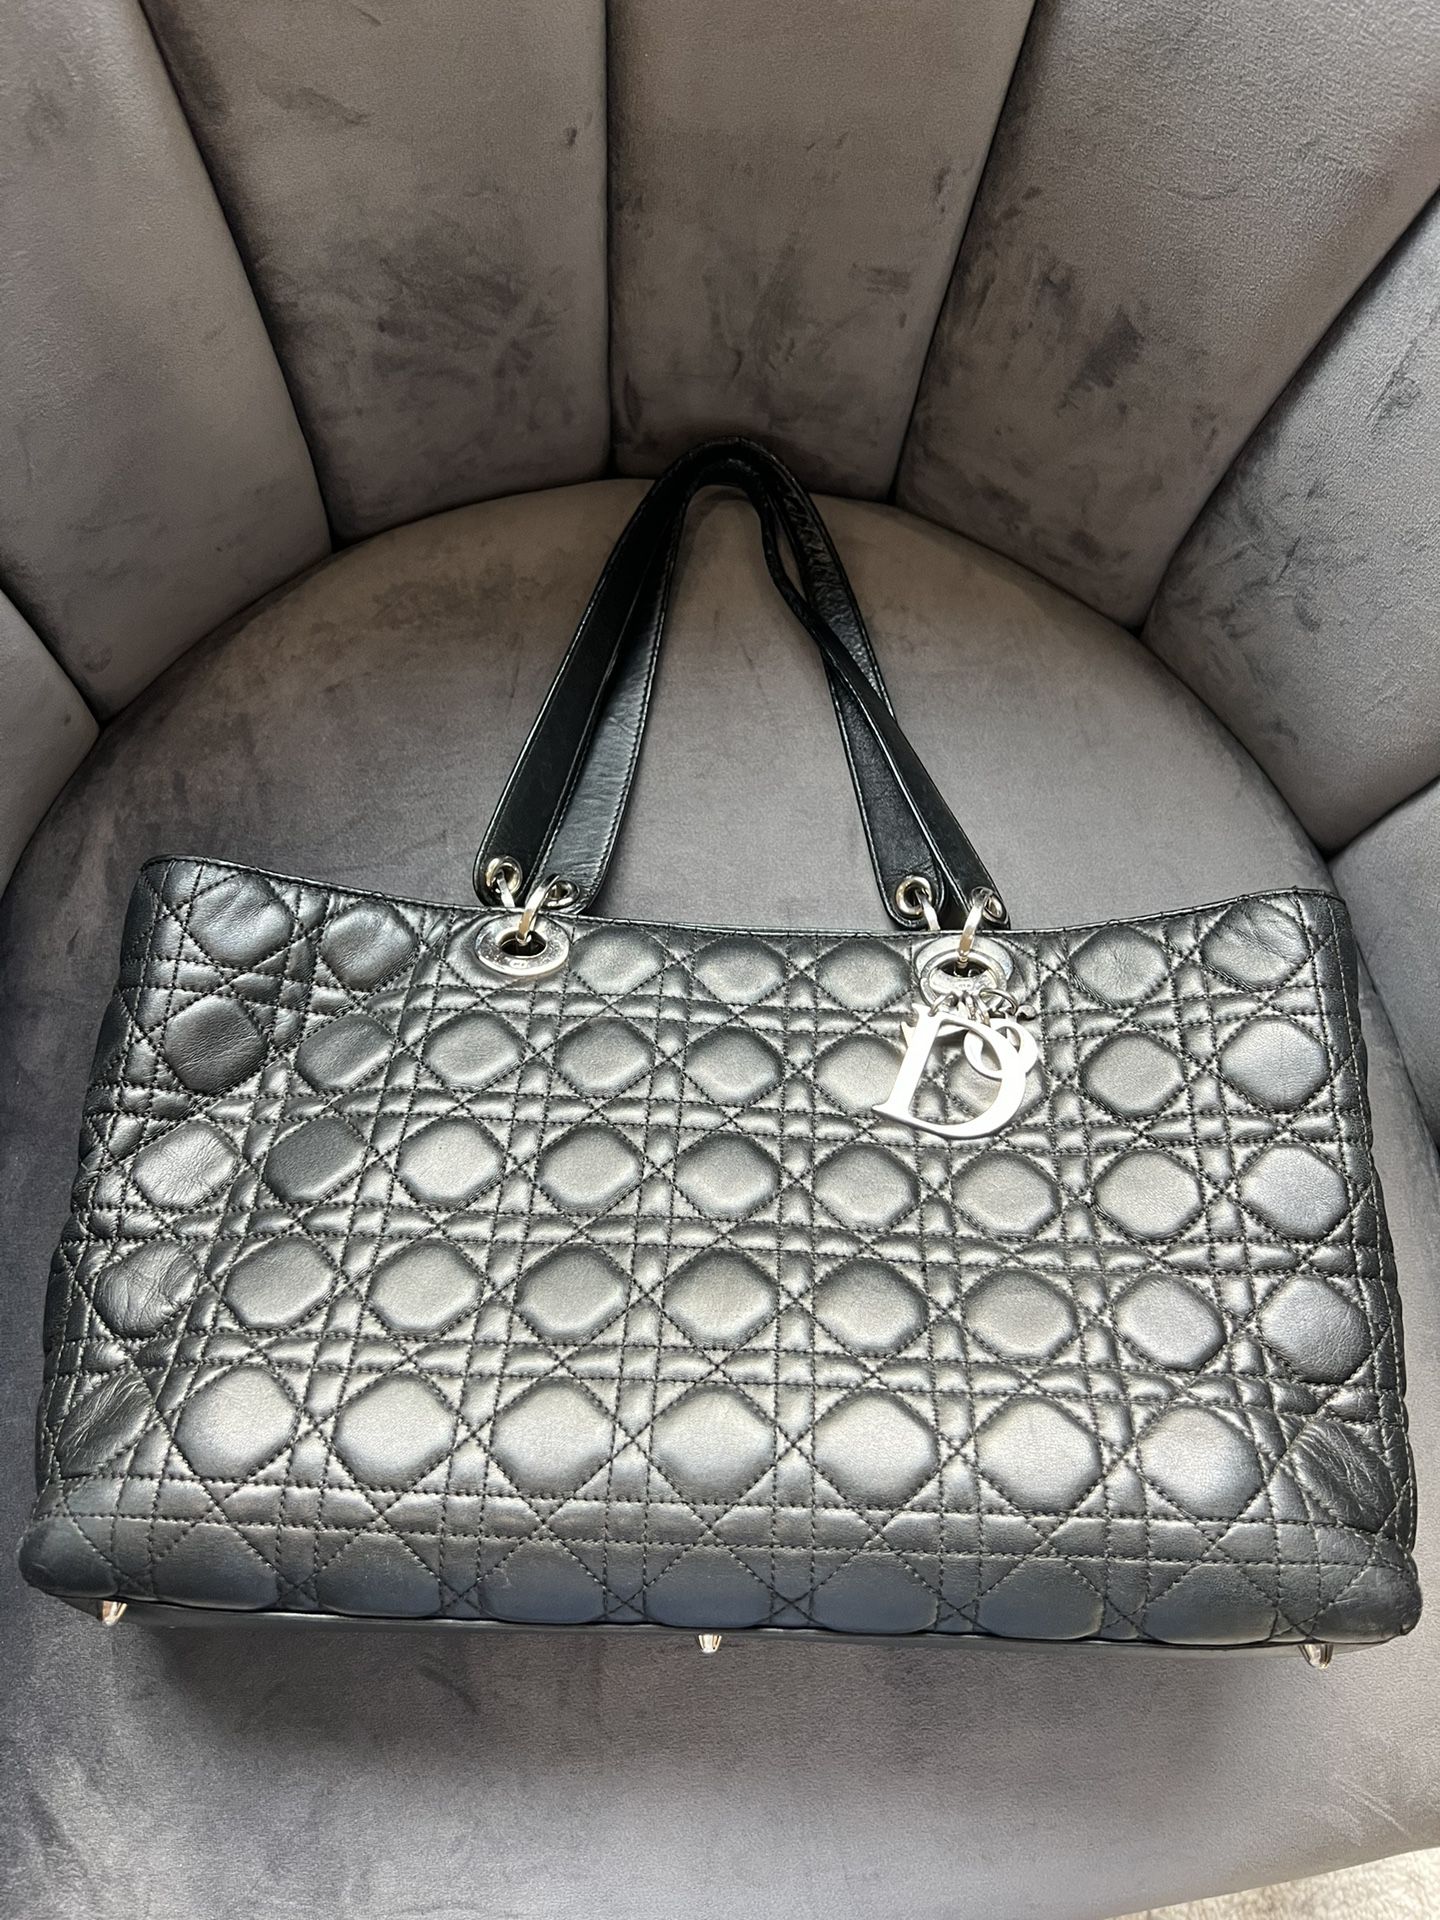 Lady Dior Large Shopping Tote Black 